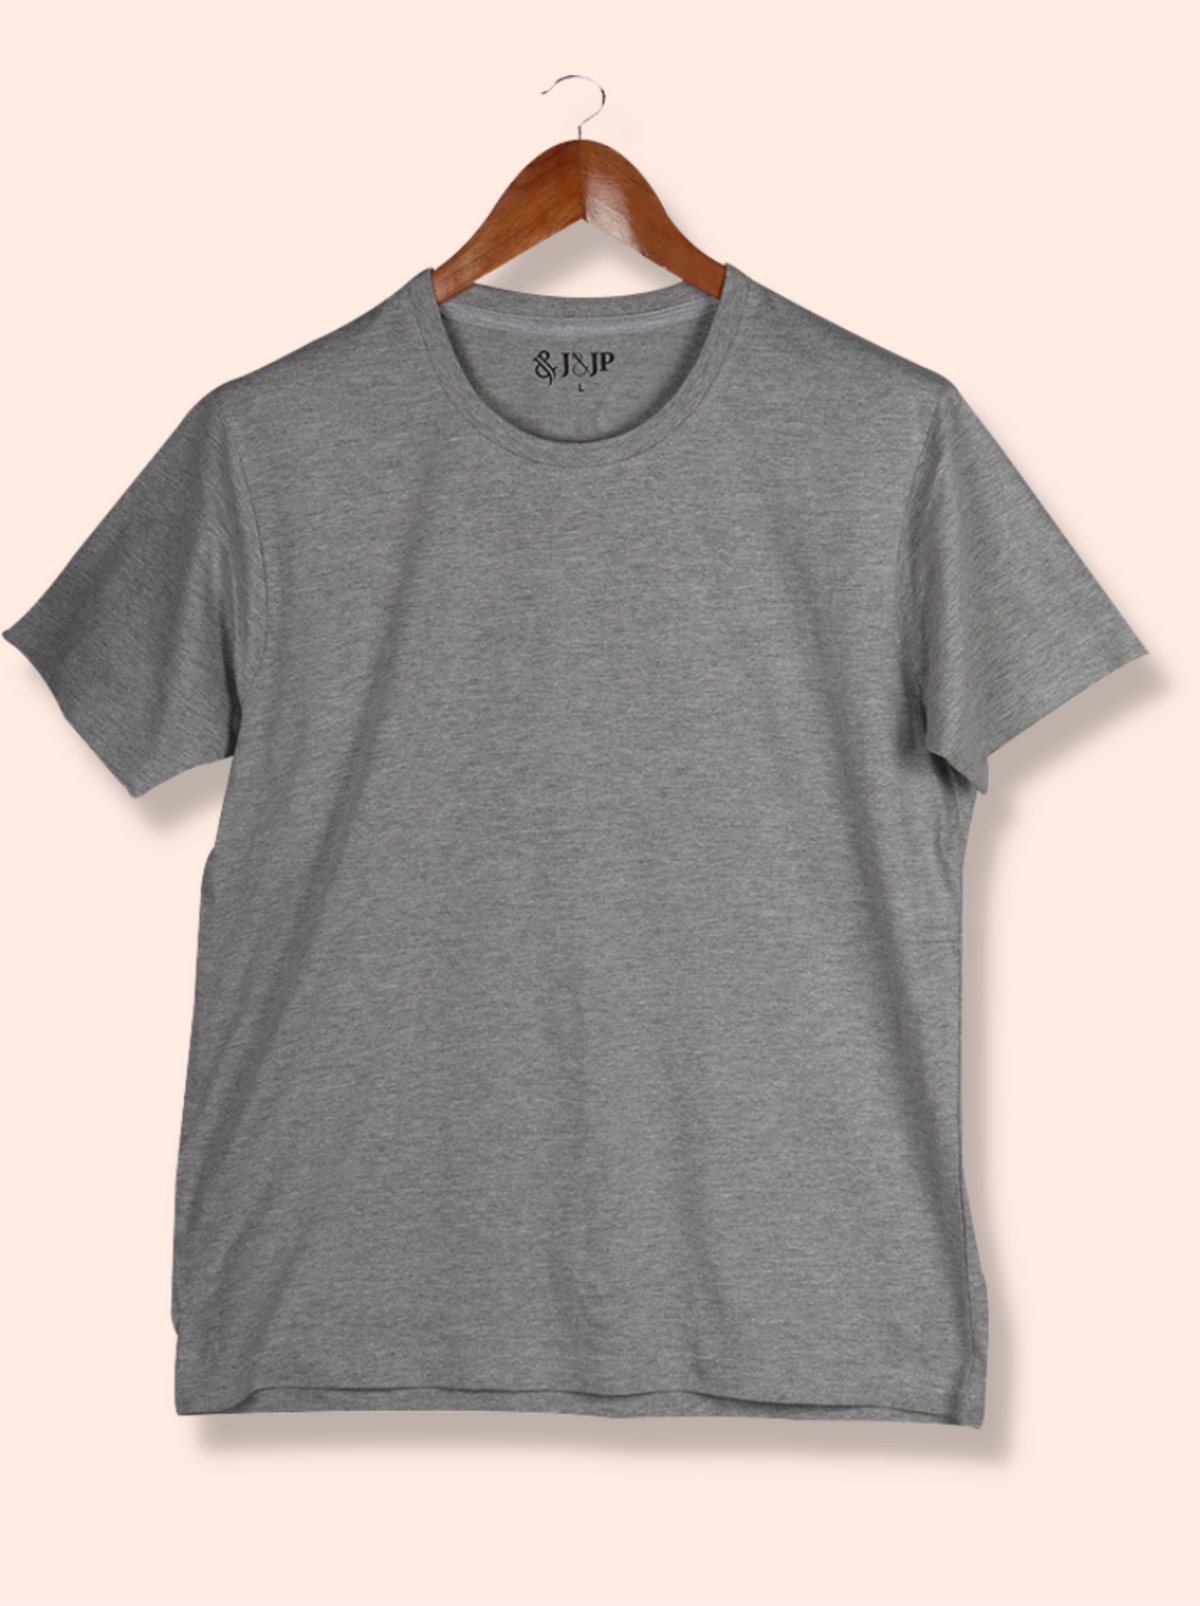 Mens Grey Half sleeve Solid Cotton jersey knit T-shirt